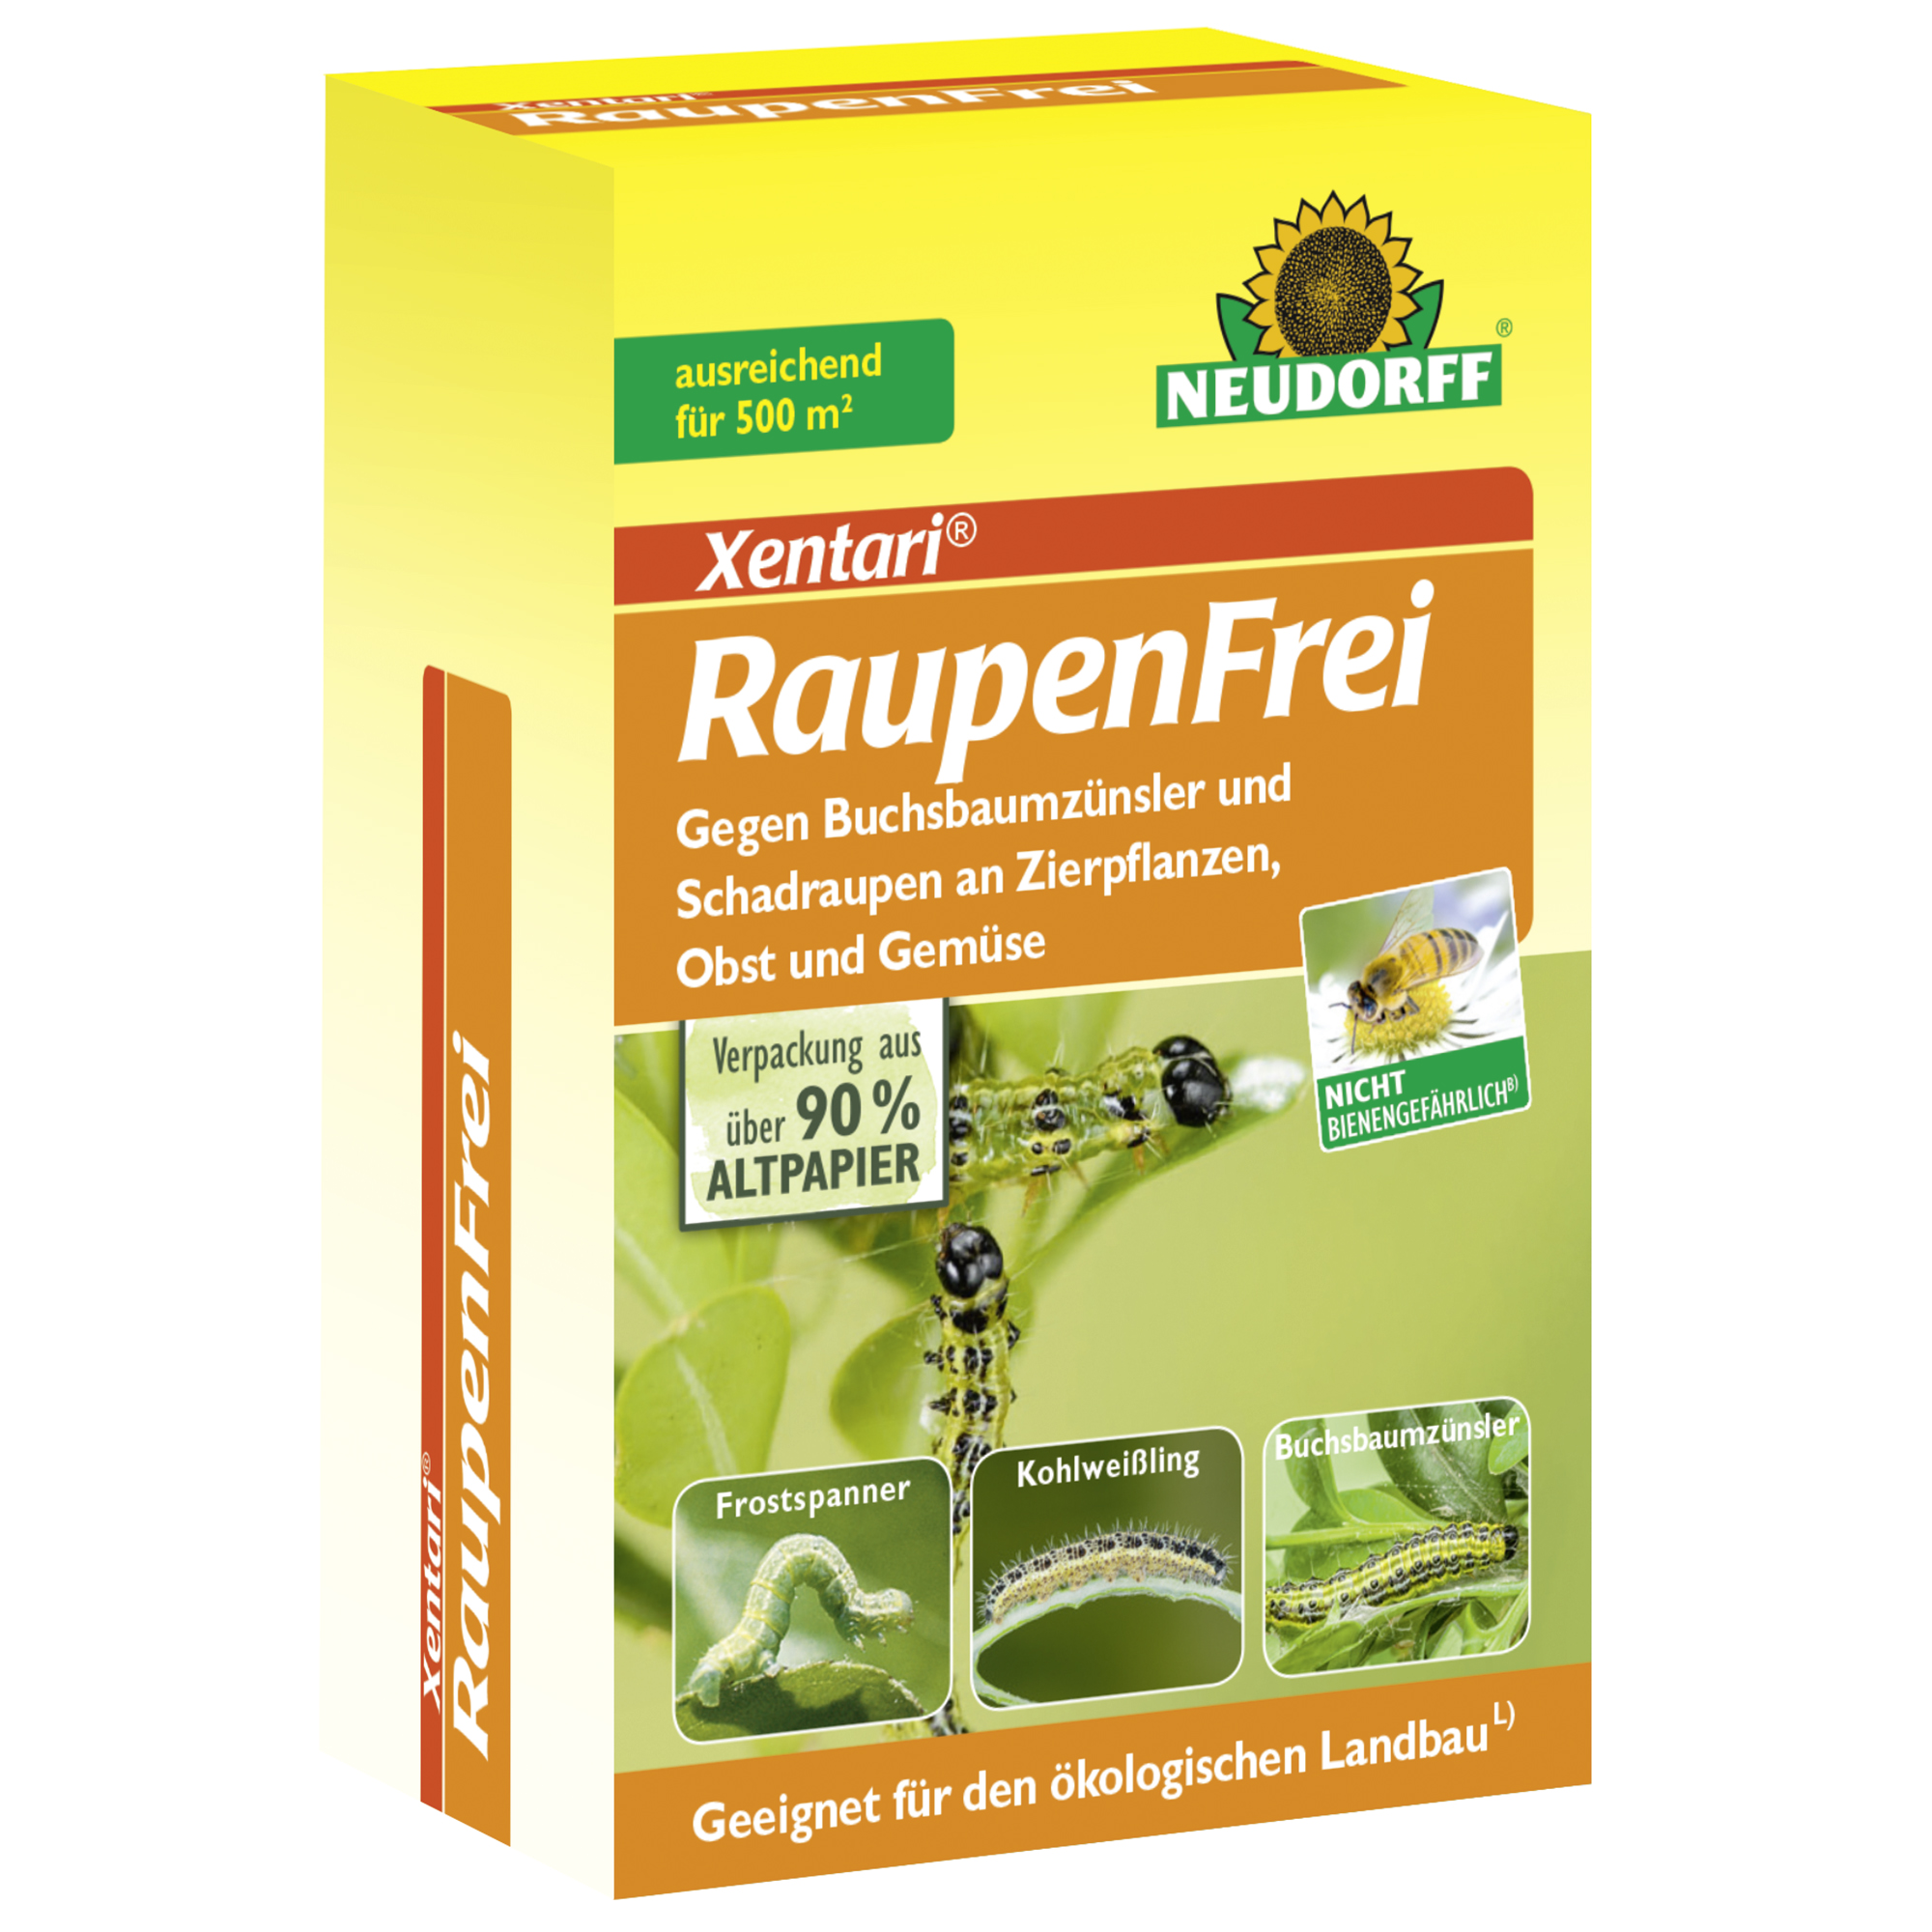 Xentari Raupenfrei 25 g + product picture